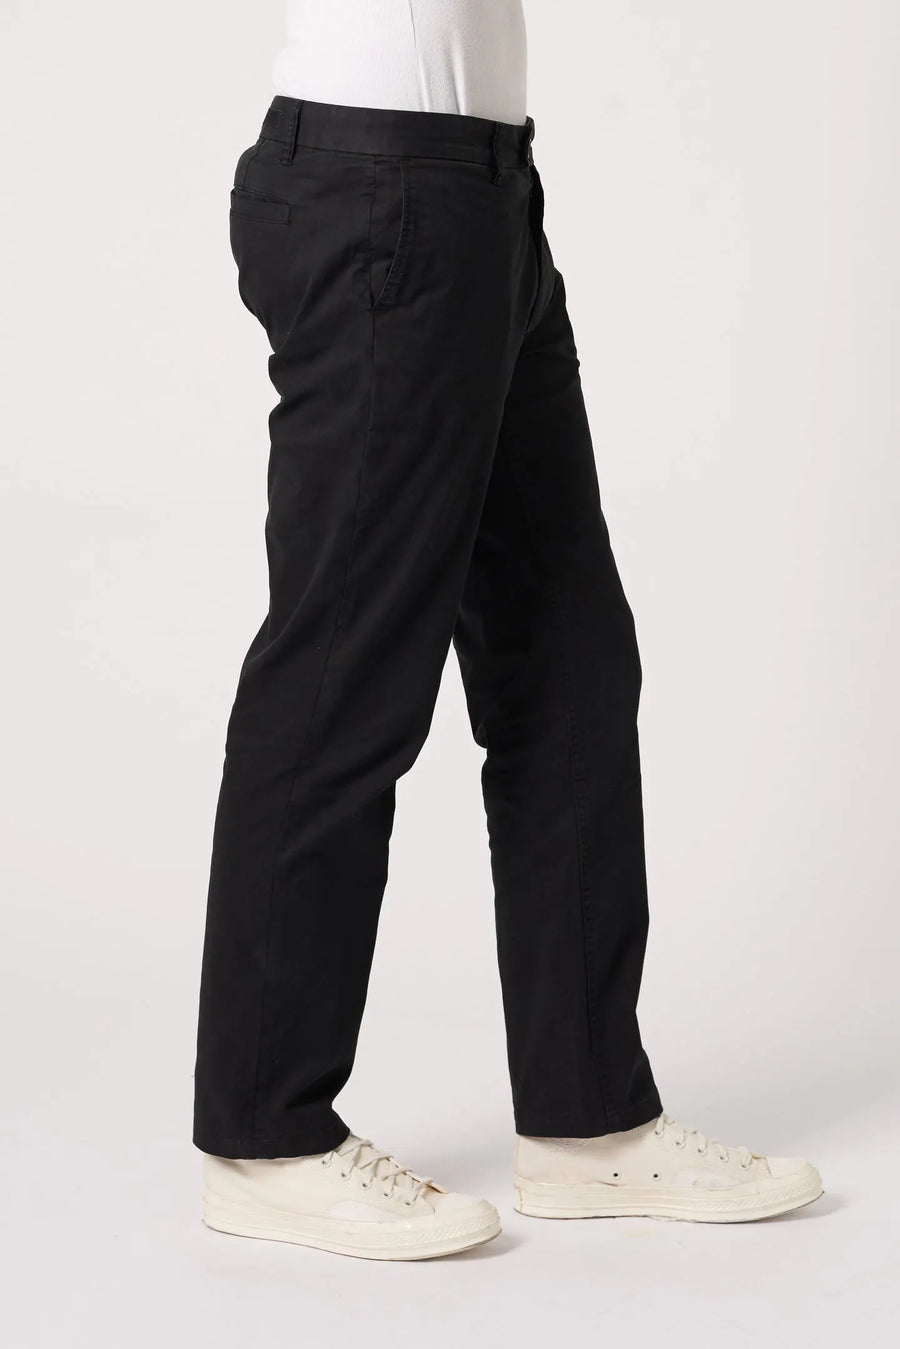 Cash Washed Twill Pant